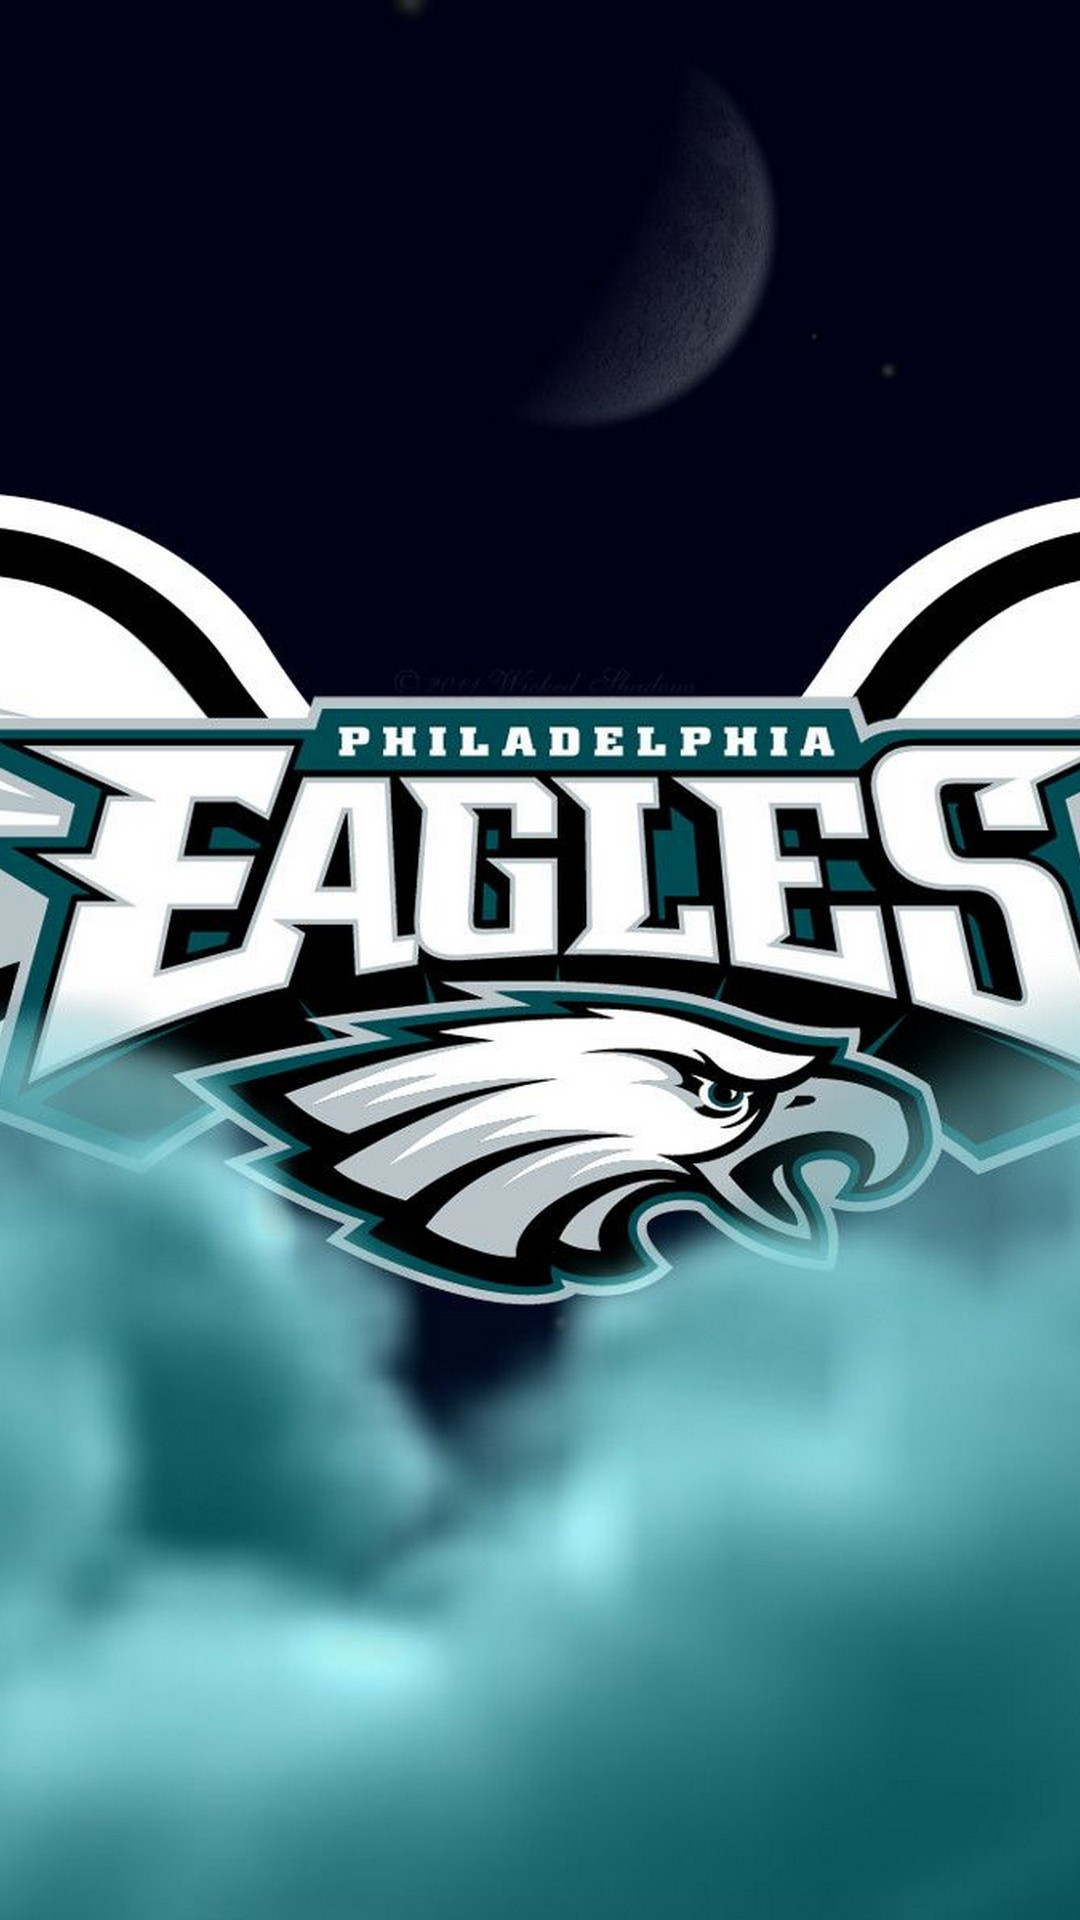 Philadelphia Eagles iPhone Screen Wallpaper with high-resolution 1080x1920 pixel. Donwload and set as wallpaper for your iPhone X, iPhone XS home screen backgrounds, XS Max, XR, iPhone8 lock screen wallpaper, iPhone 7, 6, SE and other mobile devices